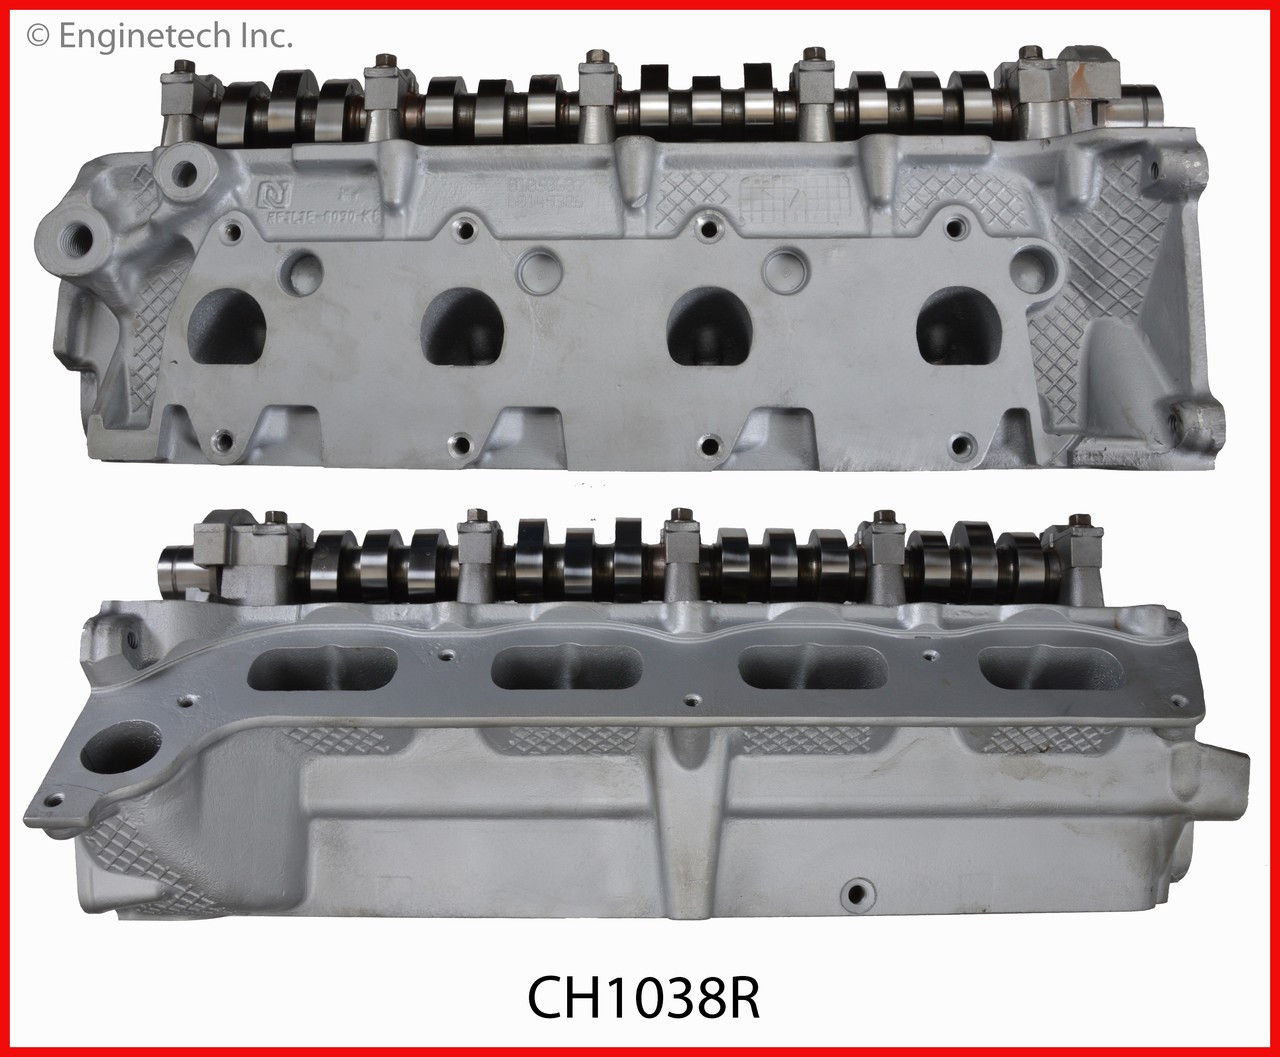 Cylinder Head Assembly - 2006 Ford Expedition 5.4L (CH1038R.A6)